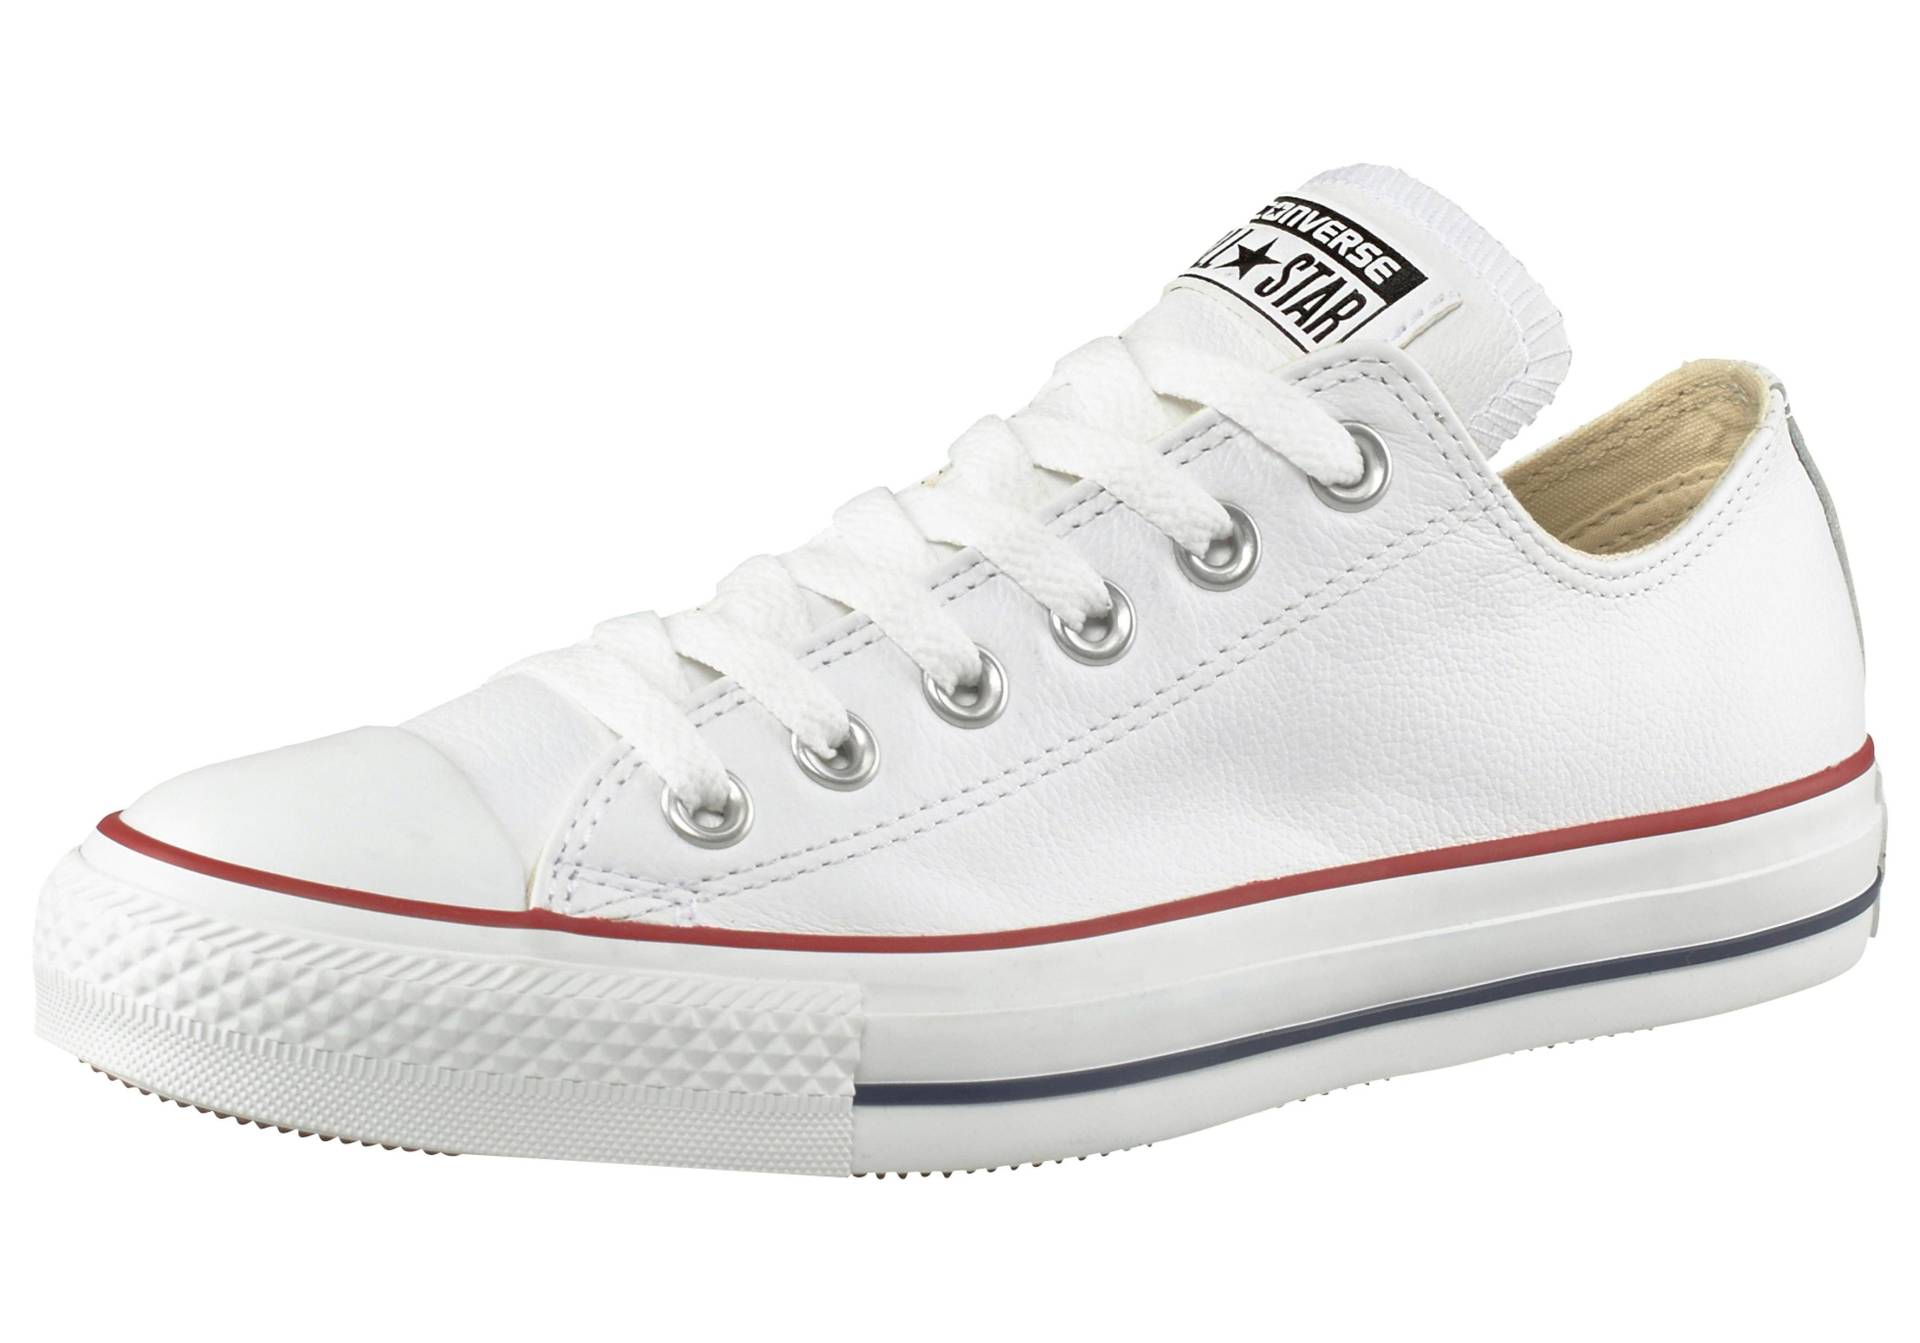 Converse Sneaker »Chuck Taylor All Star Basic Leather Ox« von Converse